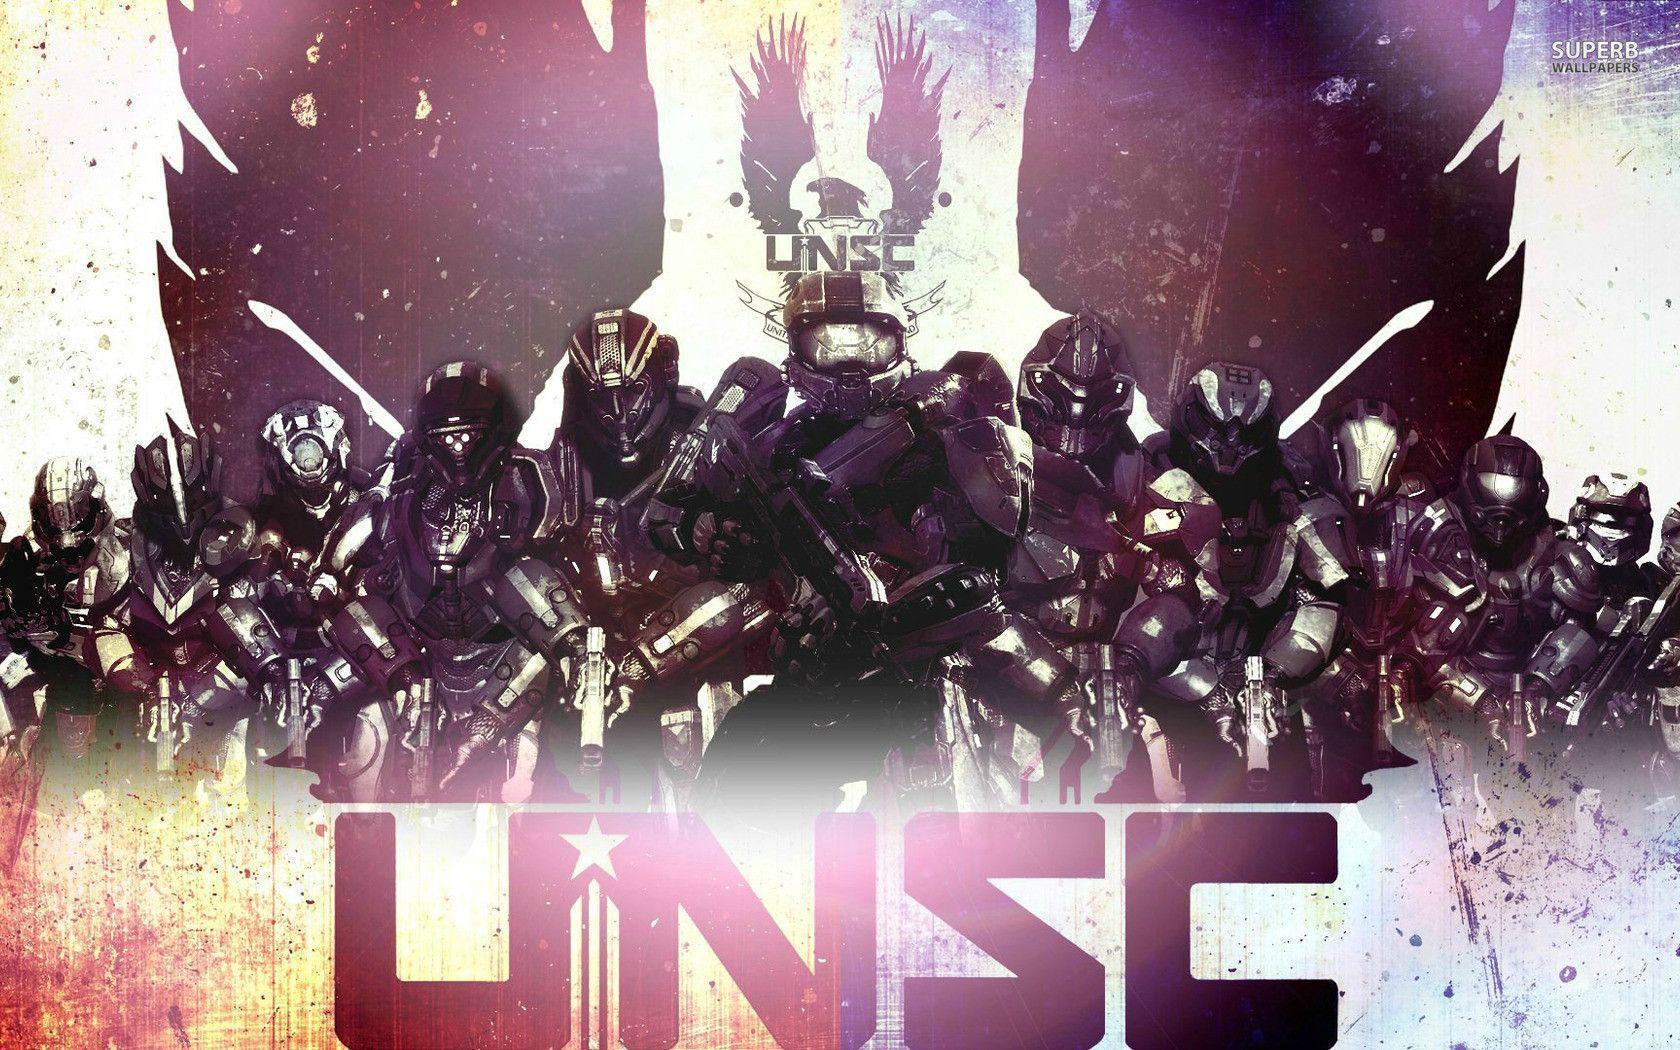 Halo 4 UNSC wallpapers